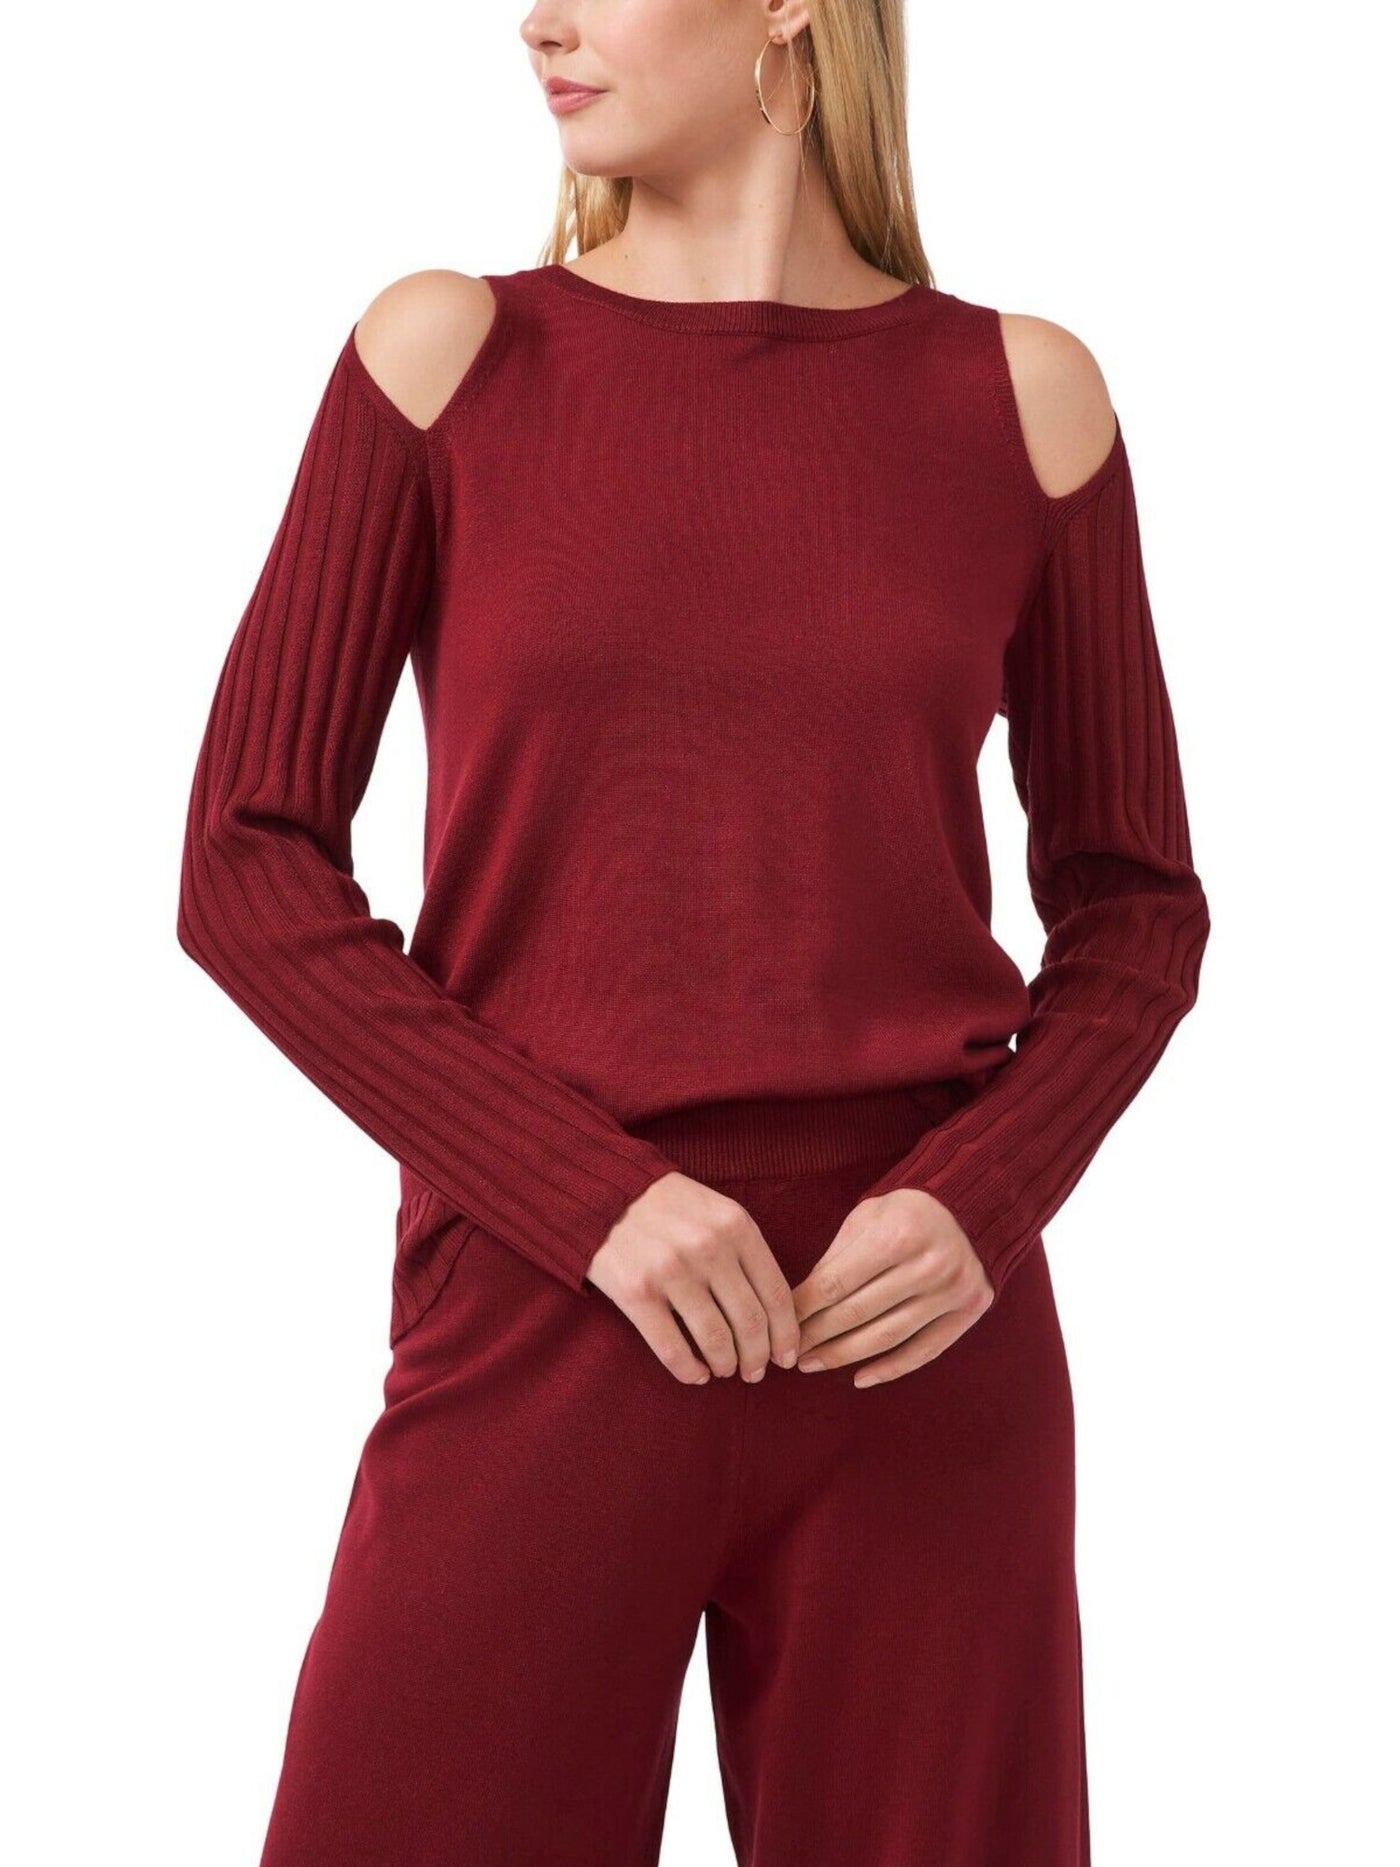 VINCE CAMUTO Womens Maroon Stretch Ribbed Cold Shoulder Mixed Textured Long Sleeve Crew Neck Top L